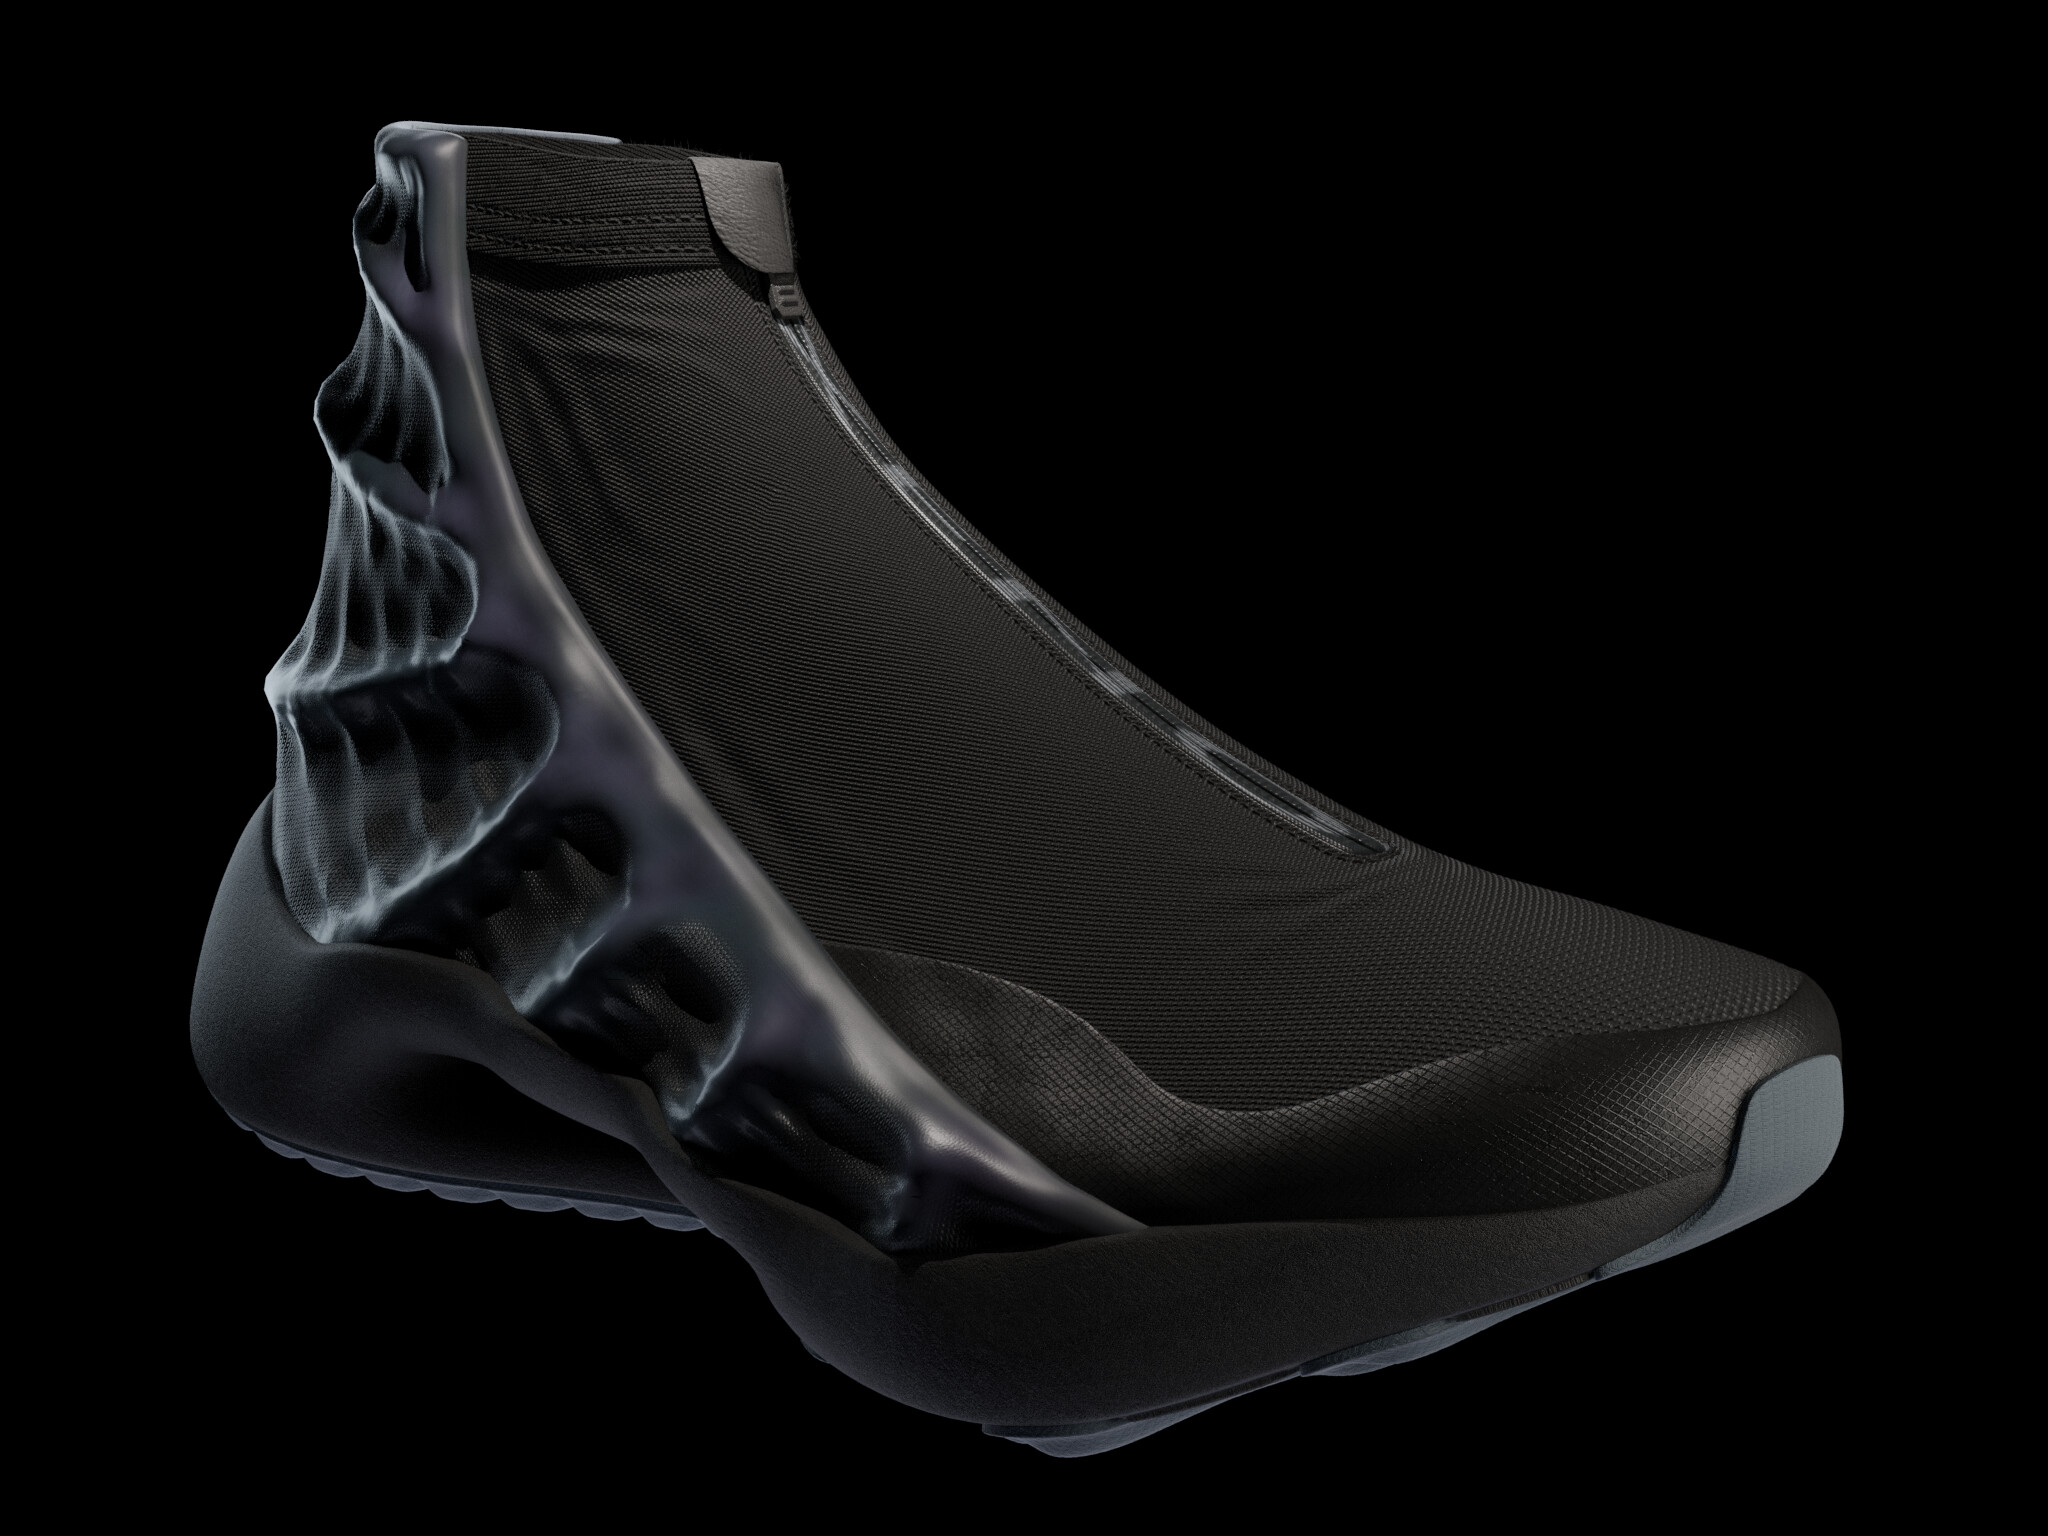 XENO Shoe - Finished Projects - Blender Artists Community